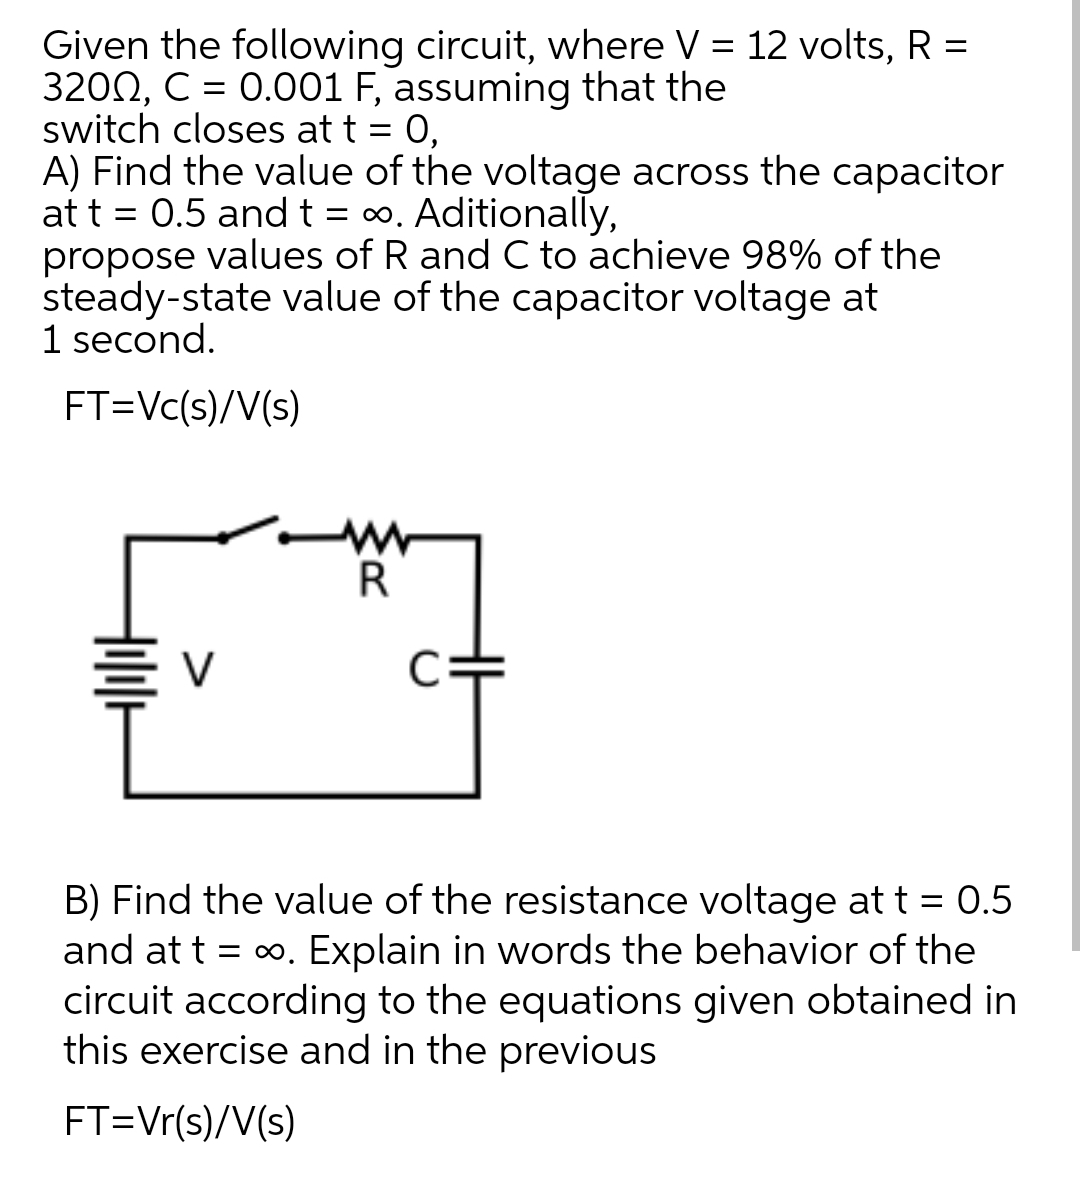 Given the following circuit, where V = 12 volts, R =
3200, C = 0.001 F, assuming that the
switch closes at t = 0,
A) Find the value of the voltage across the capacitor
at t = 0.5 andt = 0.
propose values of R and C to achieve 98% of the
steady-state value of the capacitor voltage at
1 second.
Aditionally,
FT=Vc(s)/V(s)
R
B) Find the value of the resistance voltage at t = 0.5
and at t = 0. Explain in words the behavior of the
circuit according to the equations given obtained in
this exercise and in the previous
FT=Vr(s)/V(s)
